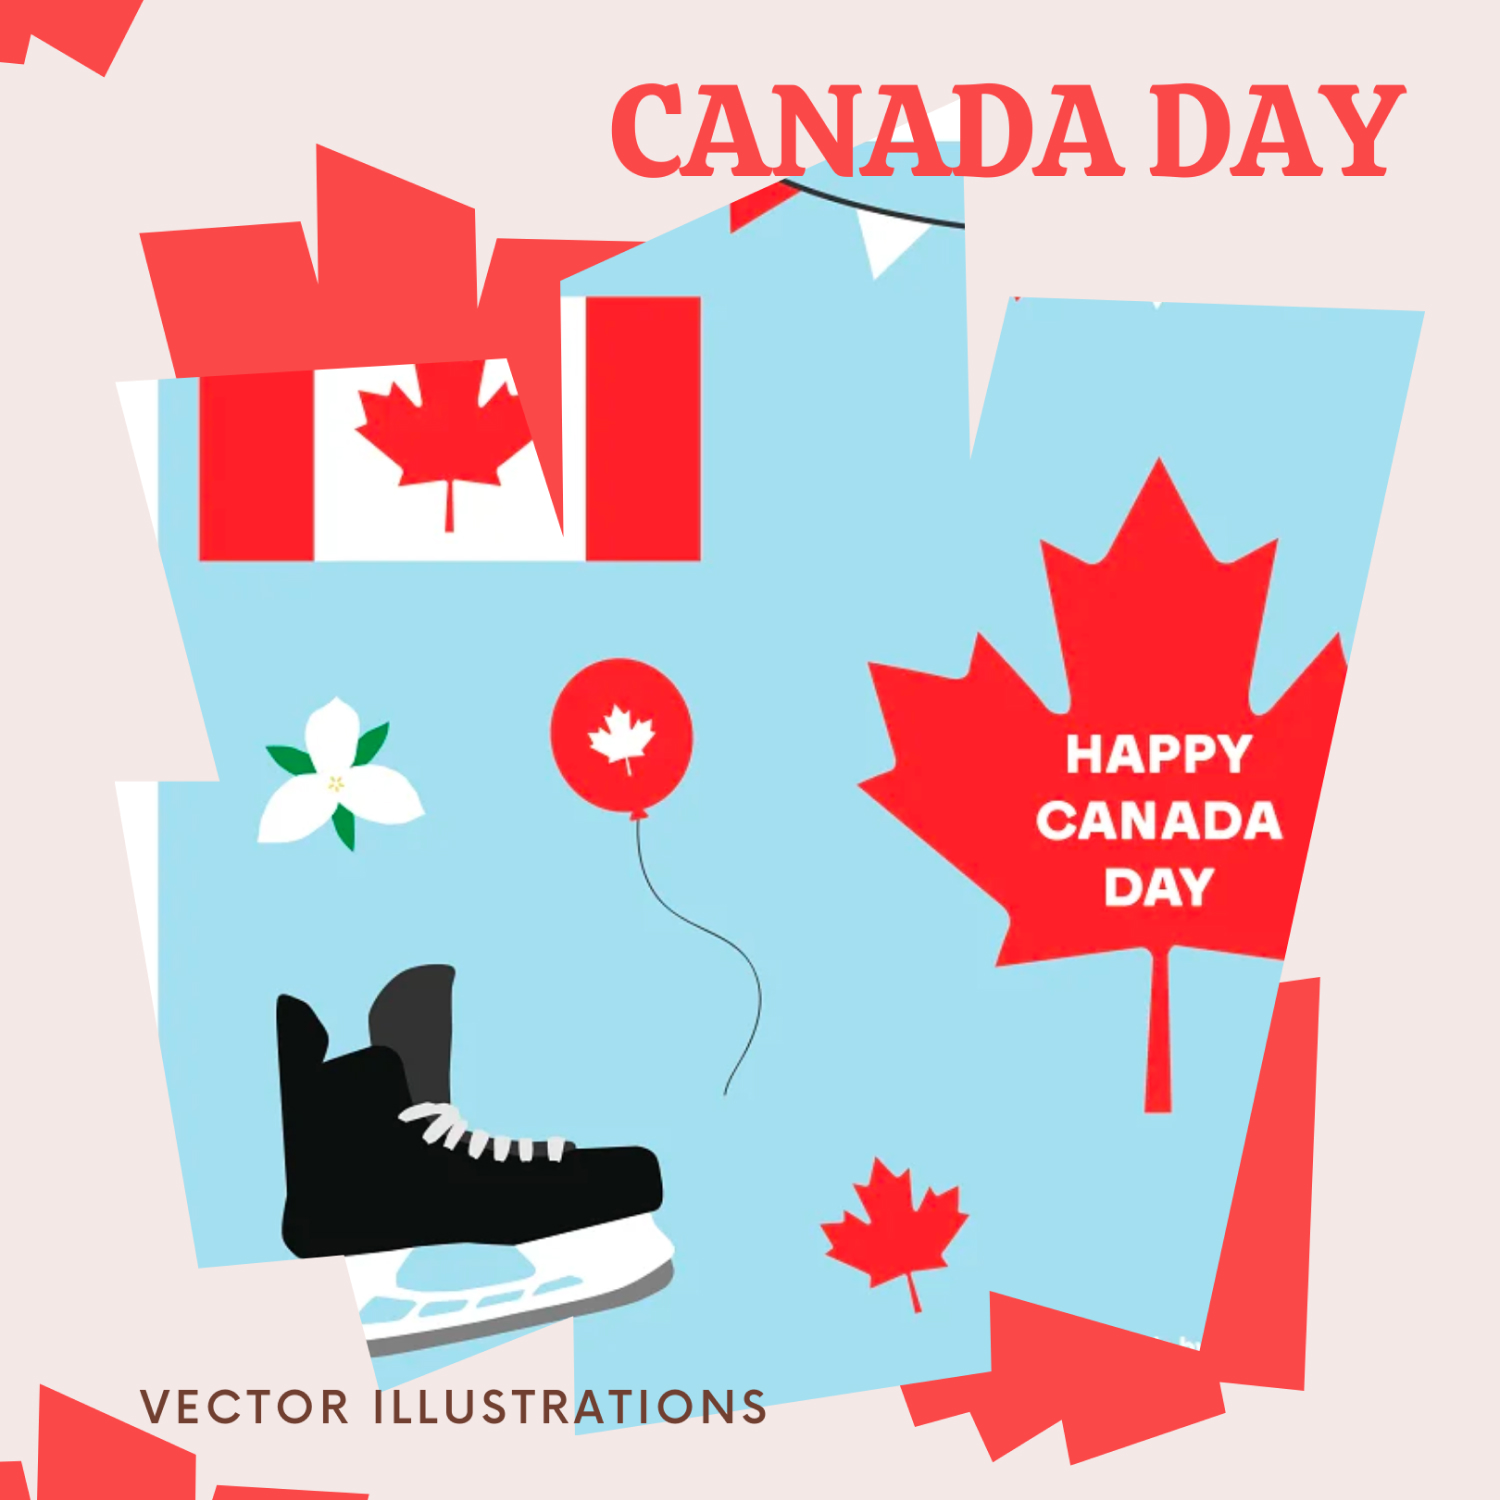 Preview canada day vector illustrations.